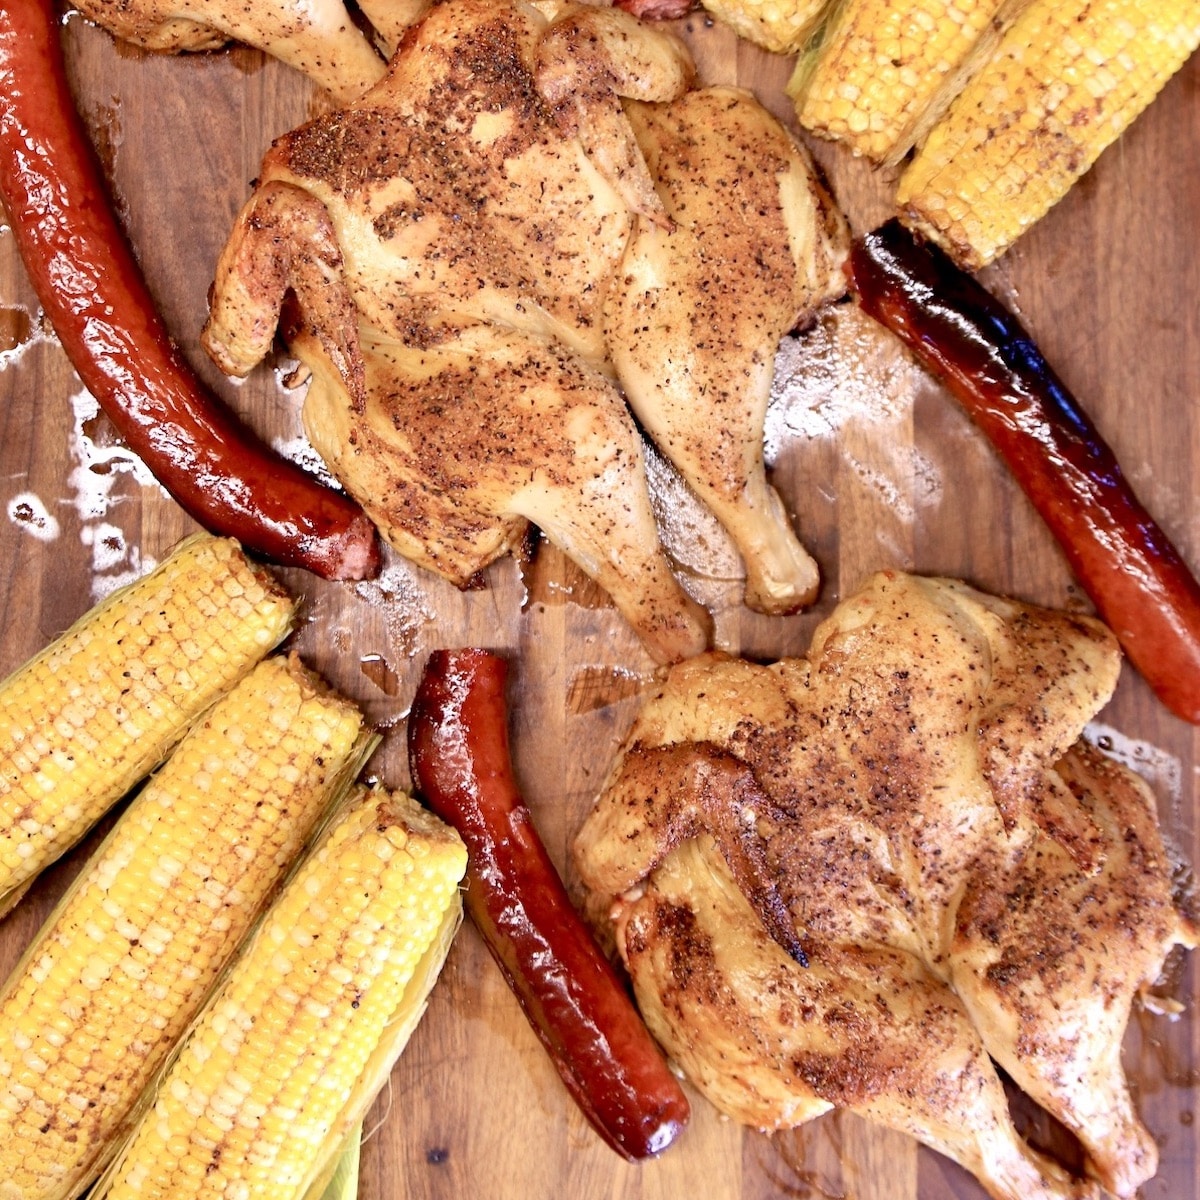 Grilled Chicken Smoked Sausage and Corn